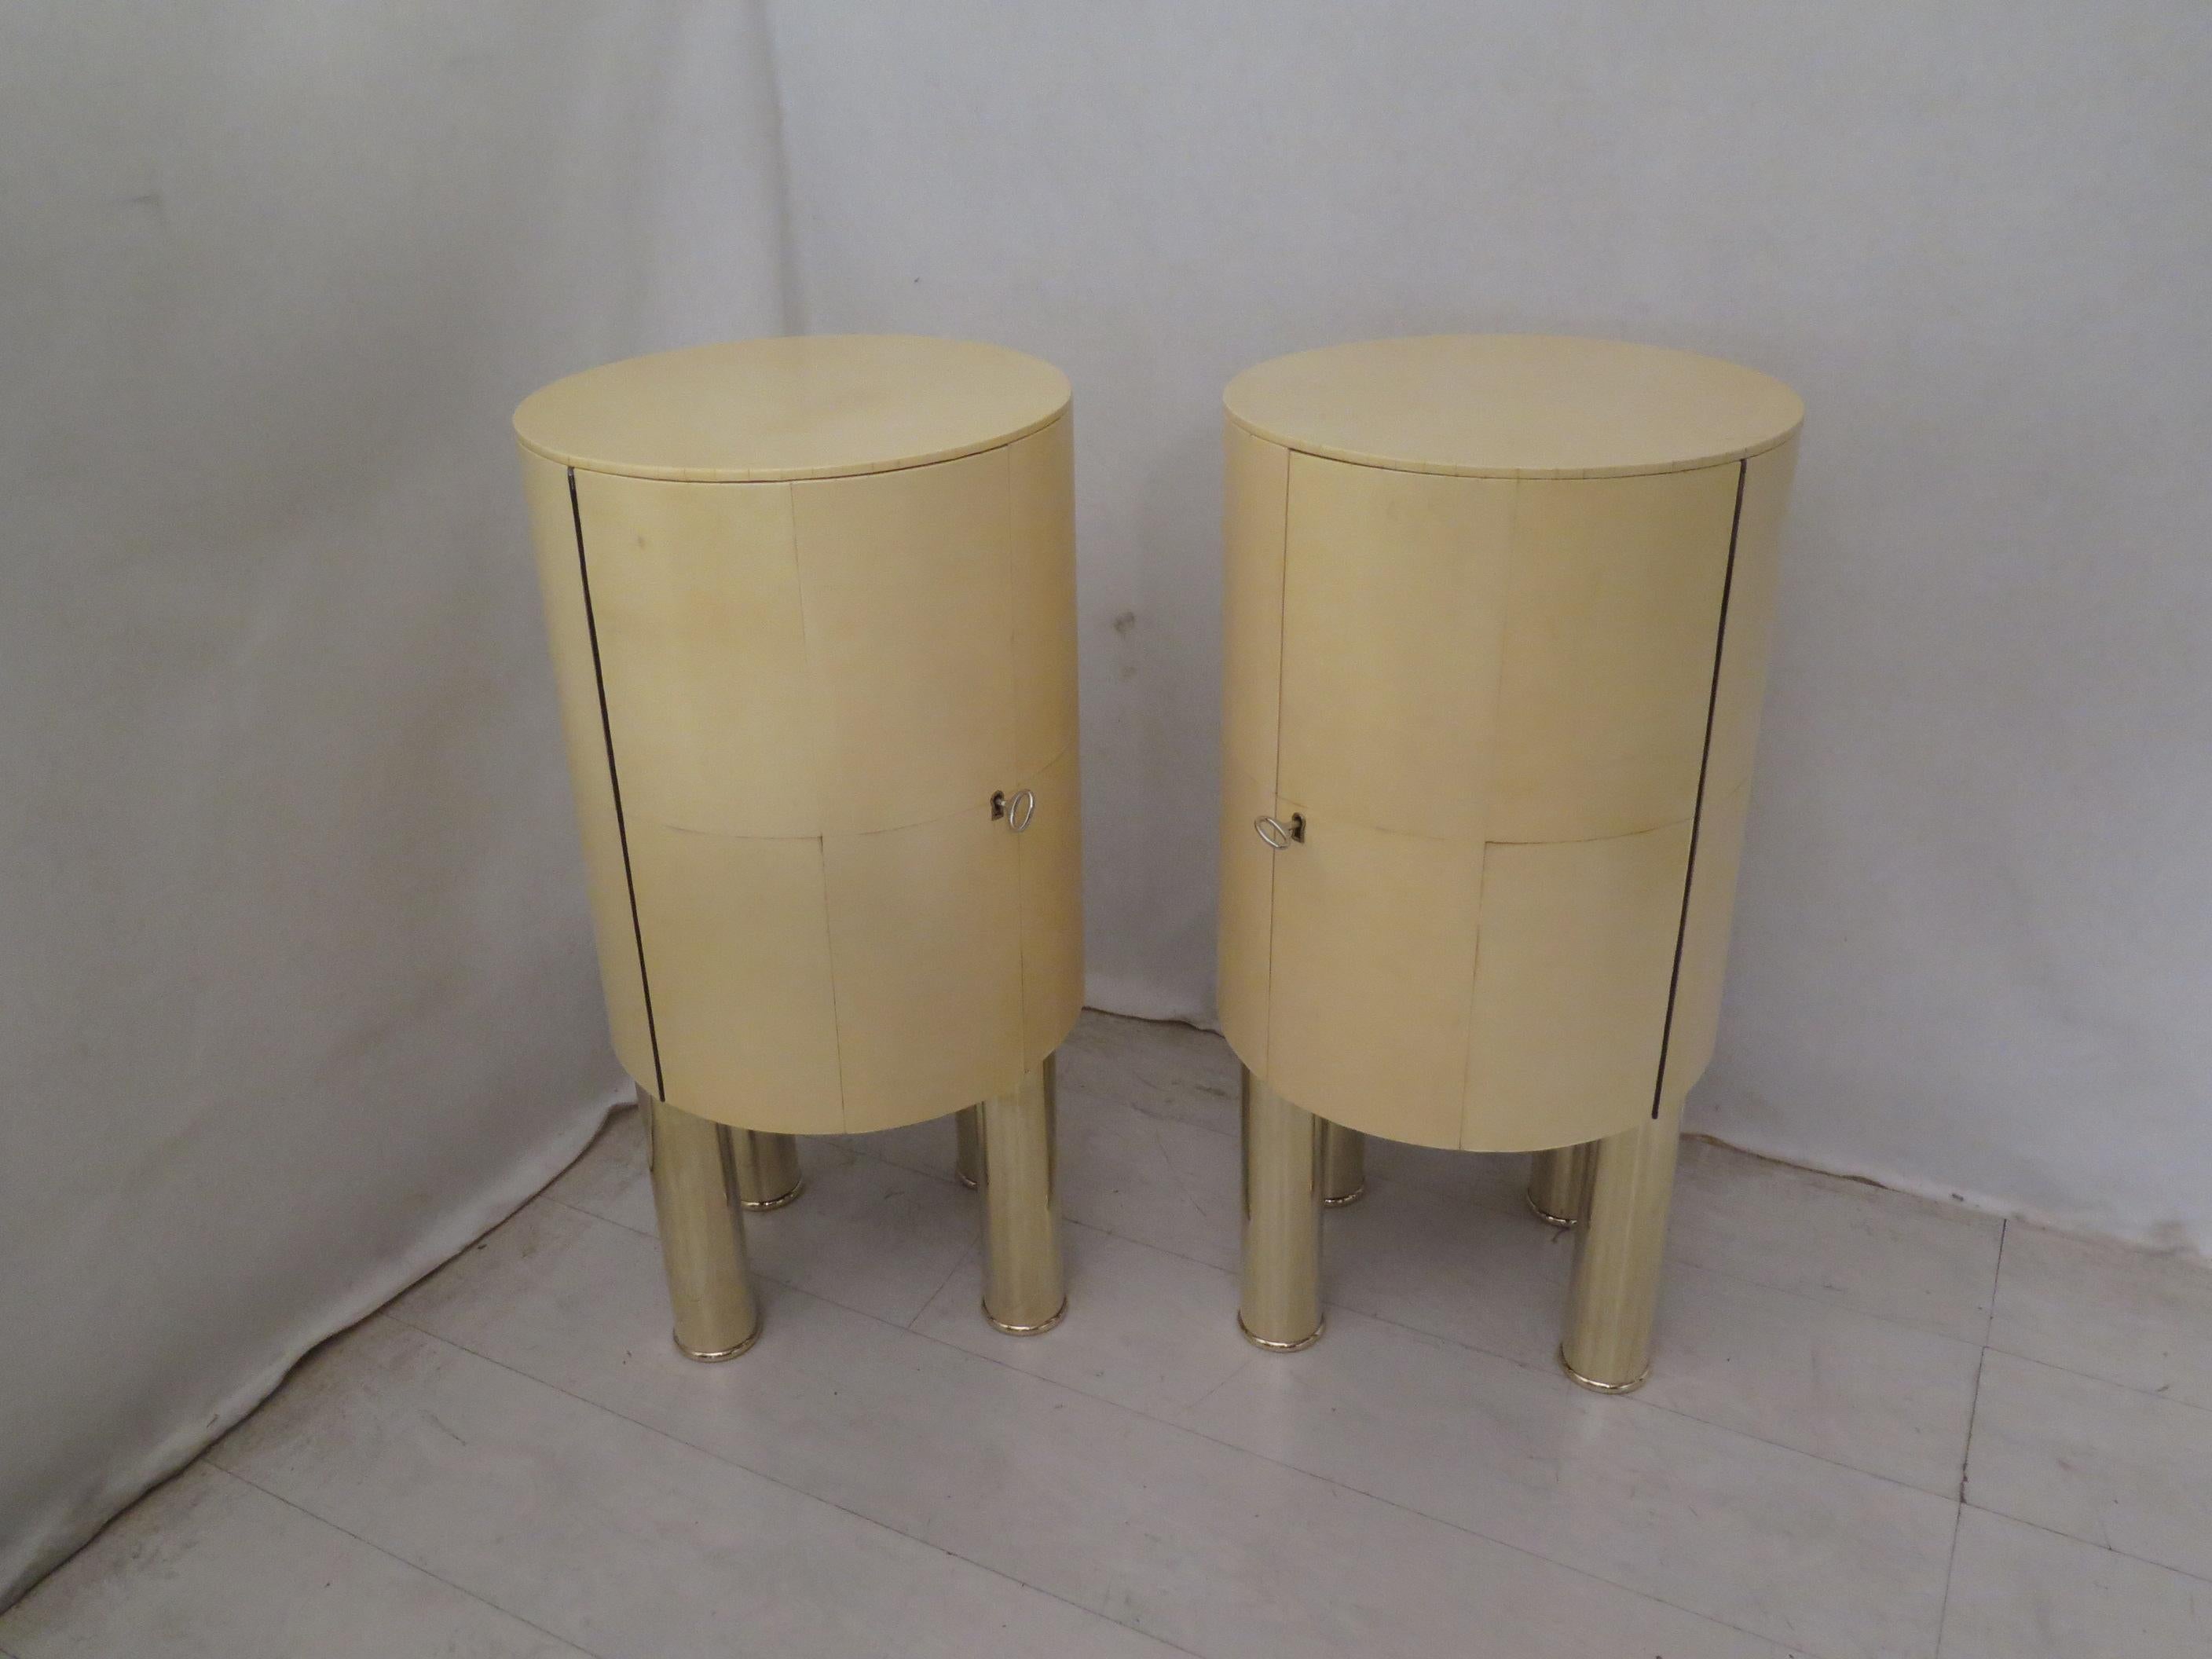 Original pair of bedside tables for the very special cylindrical design, and the use of sophisticated materials, goatskin and brass.

Their structure is in wood covered in goatskin. Cylindrical shape. They have a door on the front, with a large